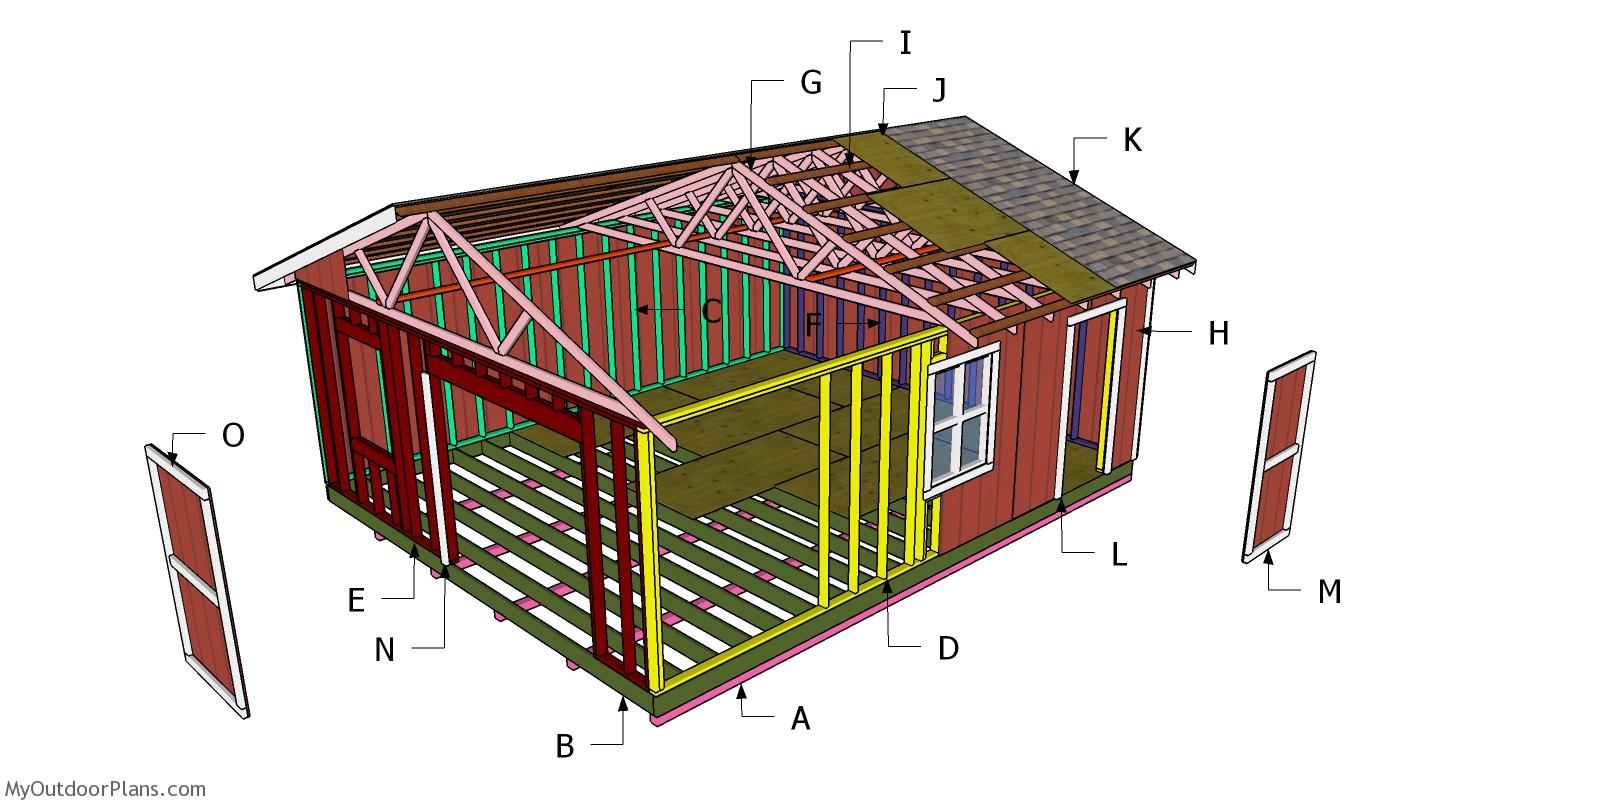 20x24 Gable Shed Roof - Free DIY Plans